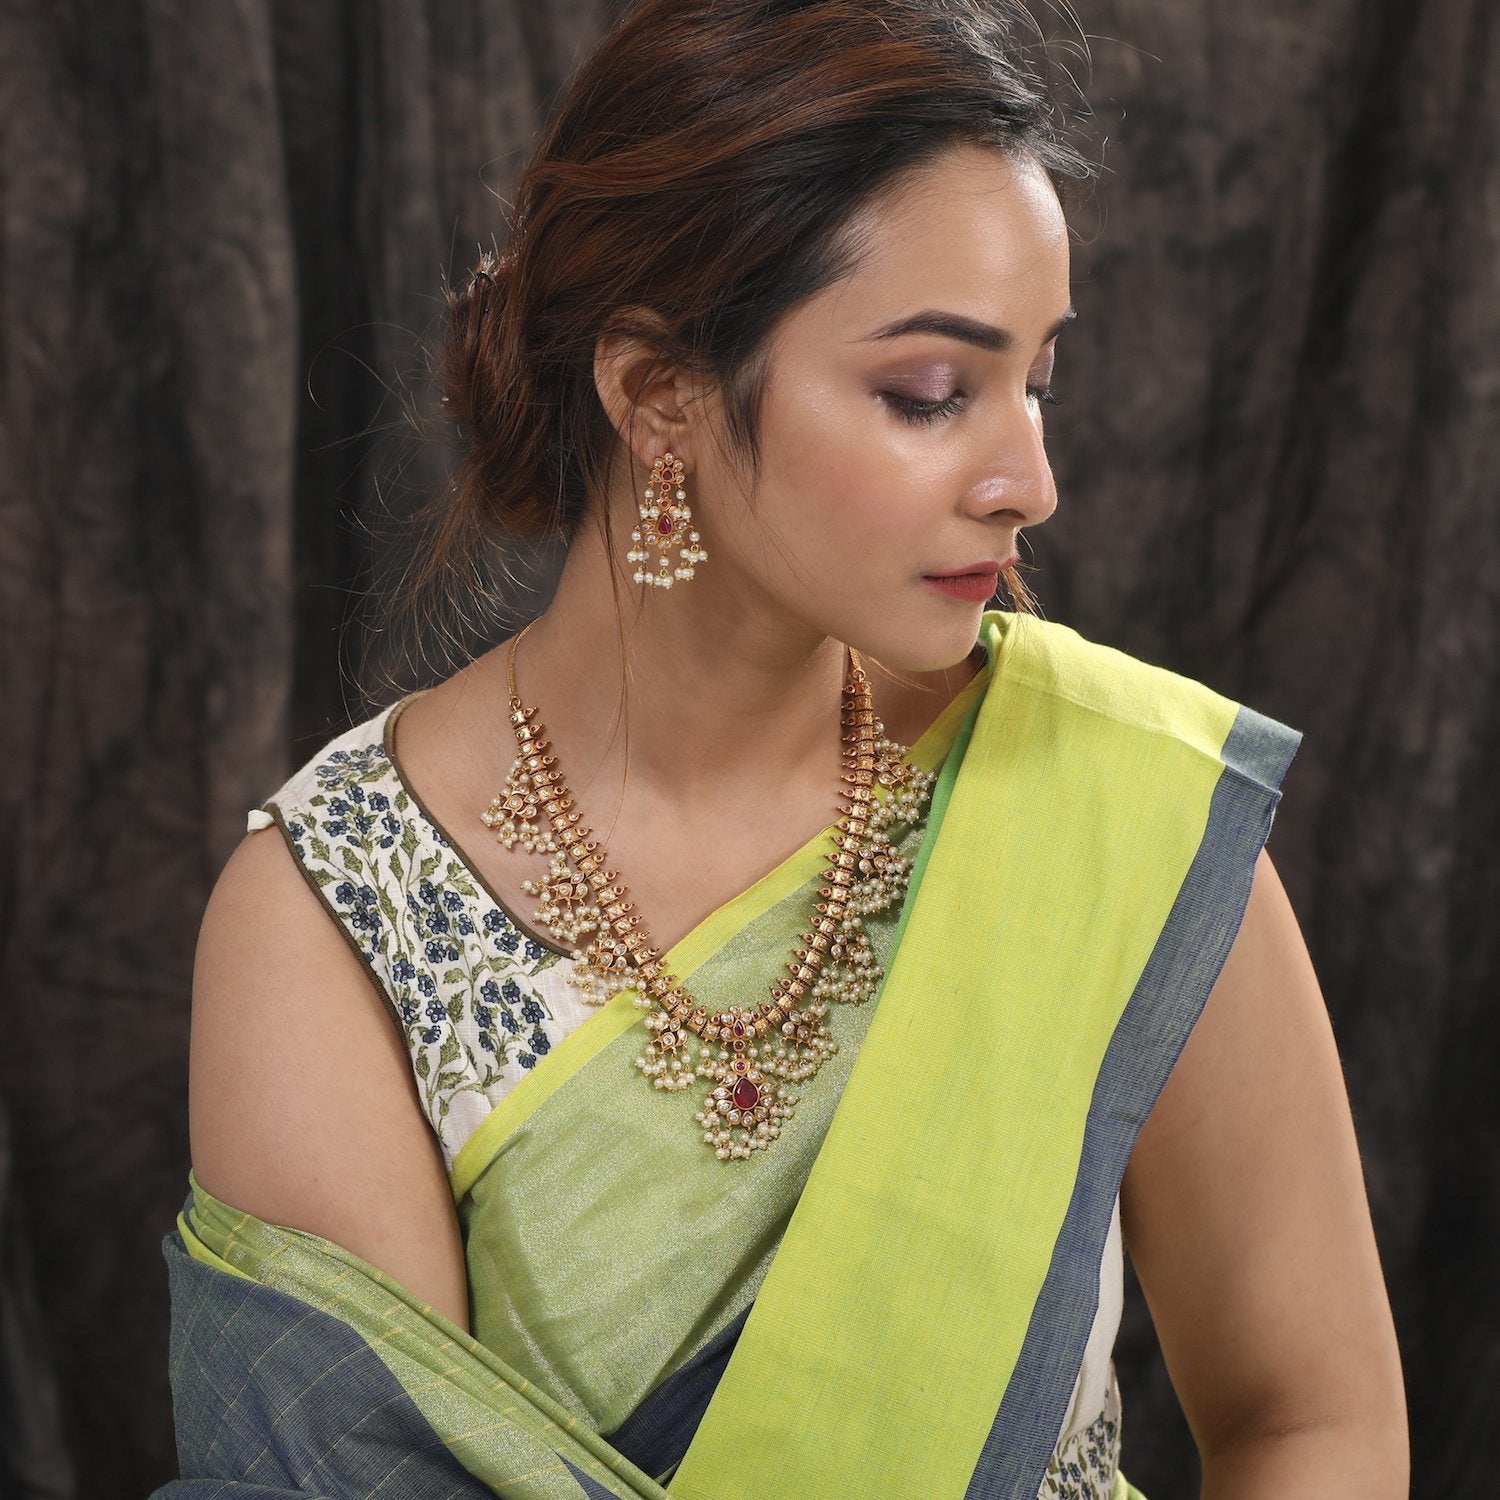 A picture of an Indian artificial jewelry set featuring a gold plated necklace and earrings embellished with pearls and green gemstones.